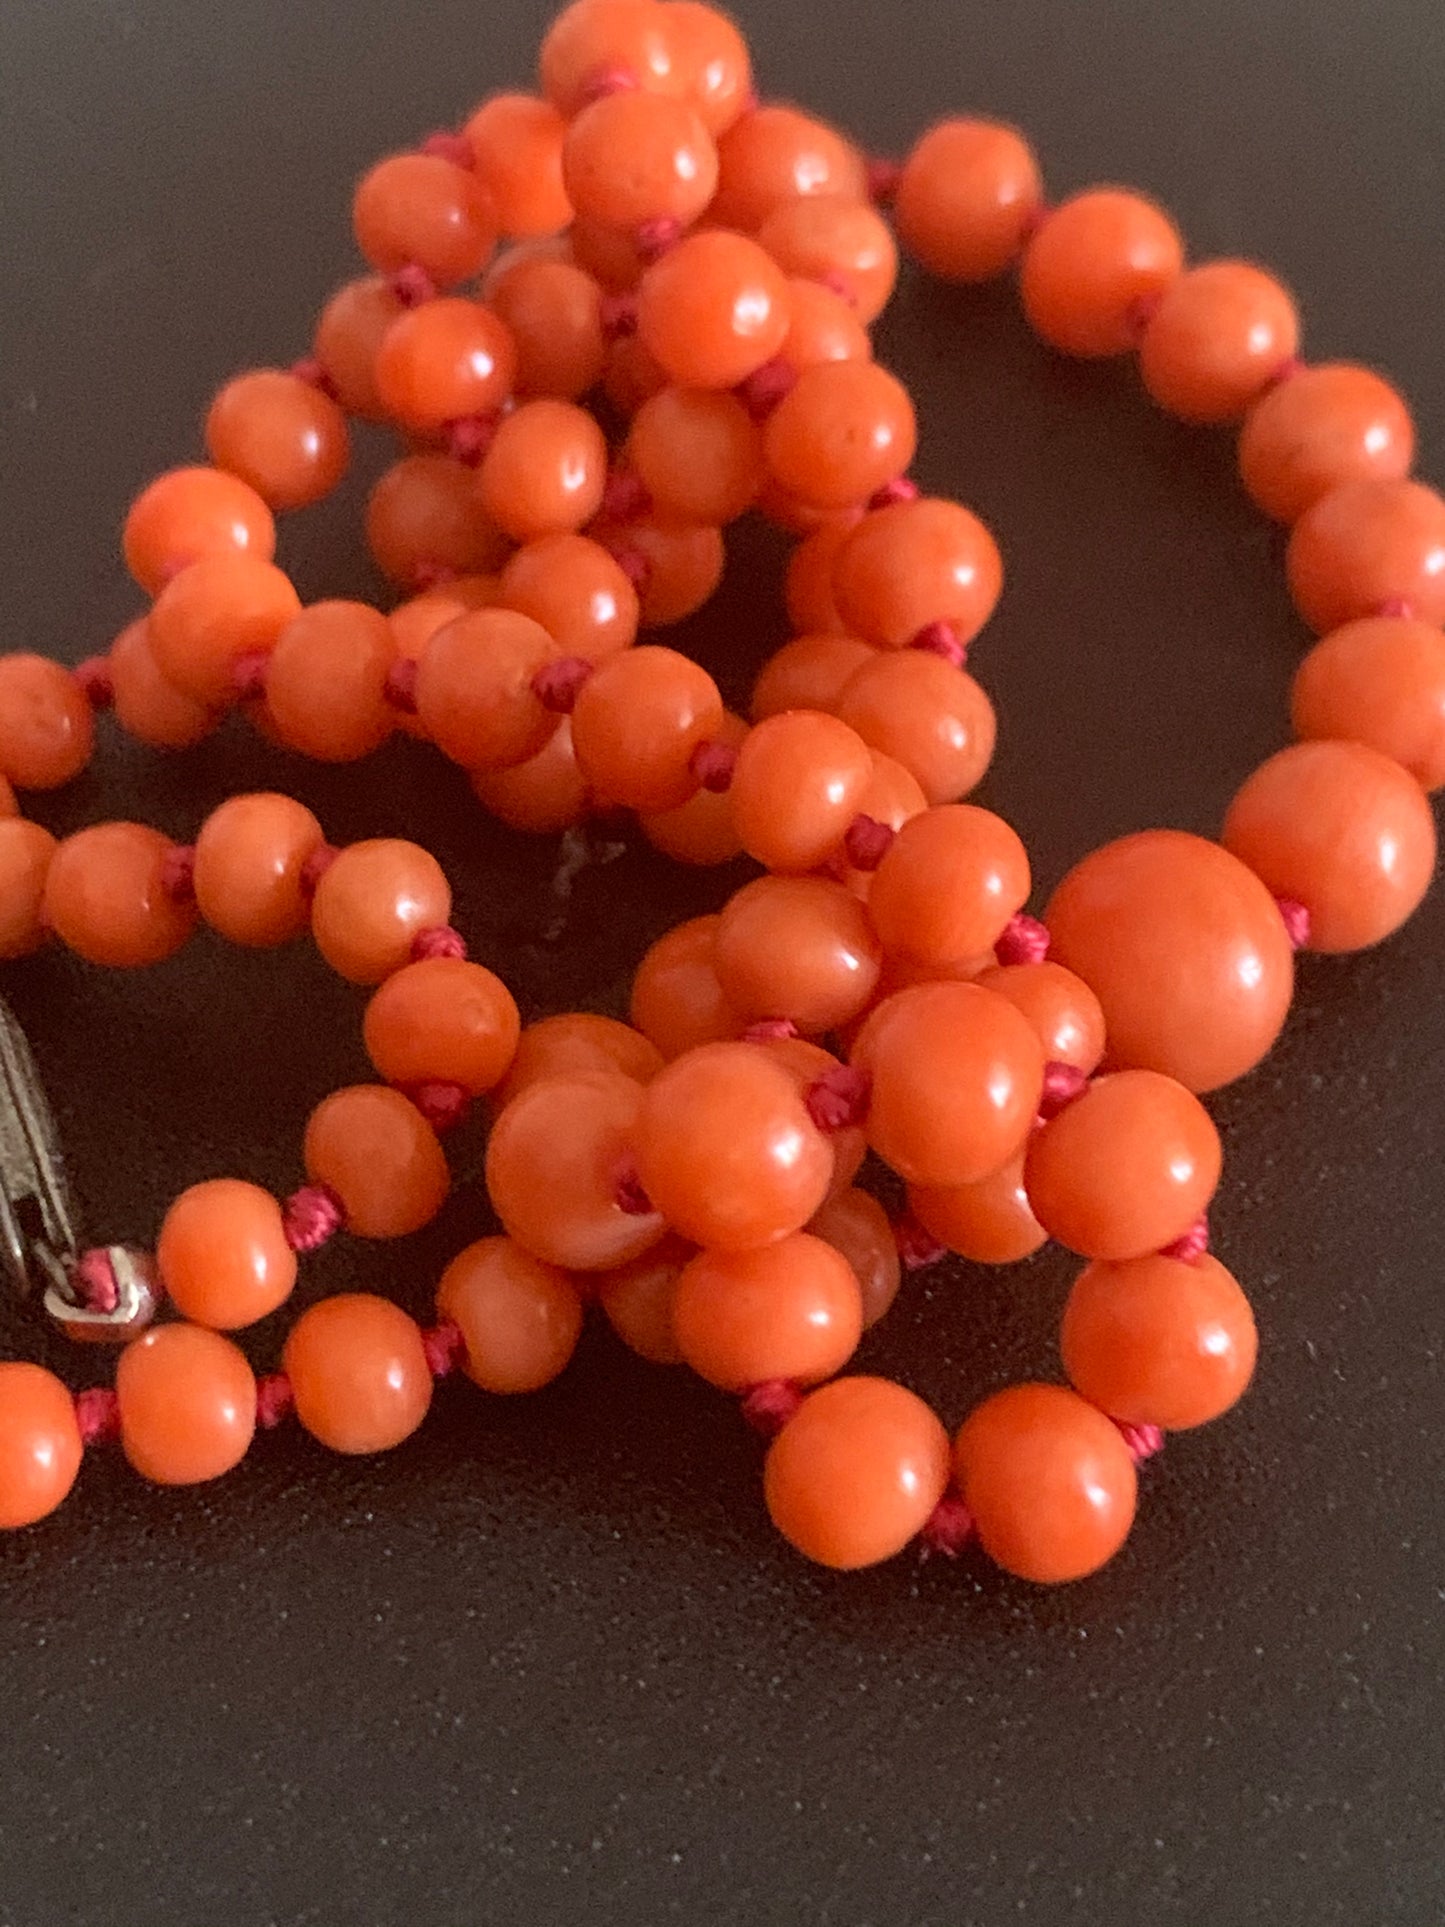 A double length coral necklace